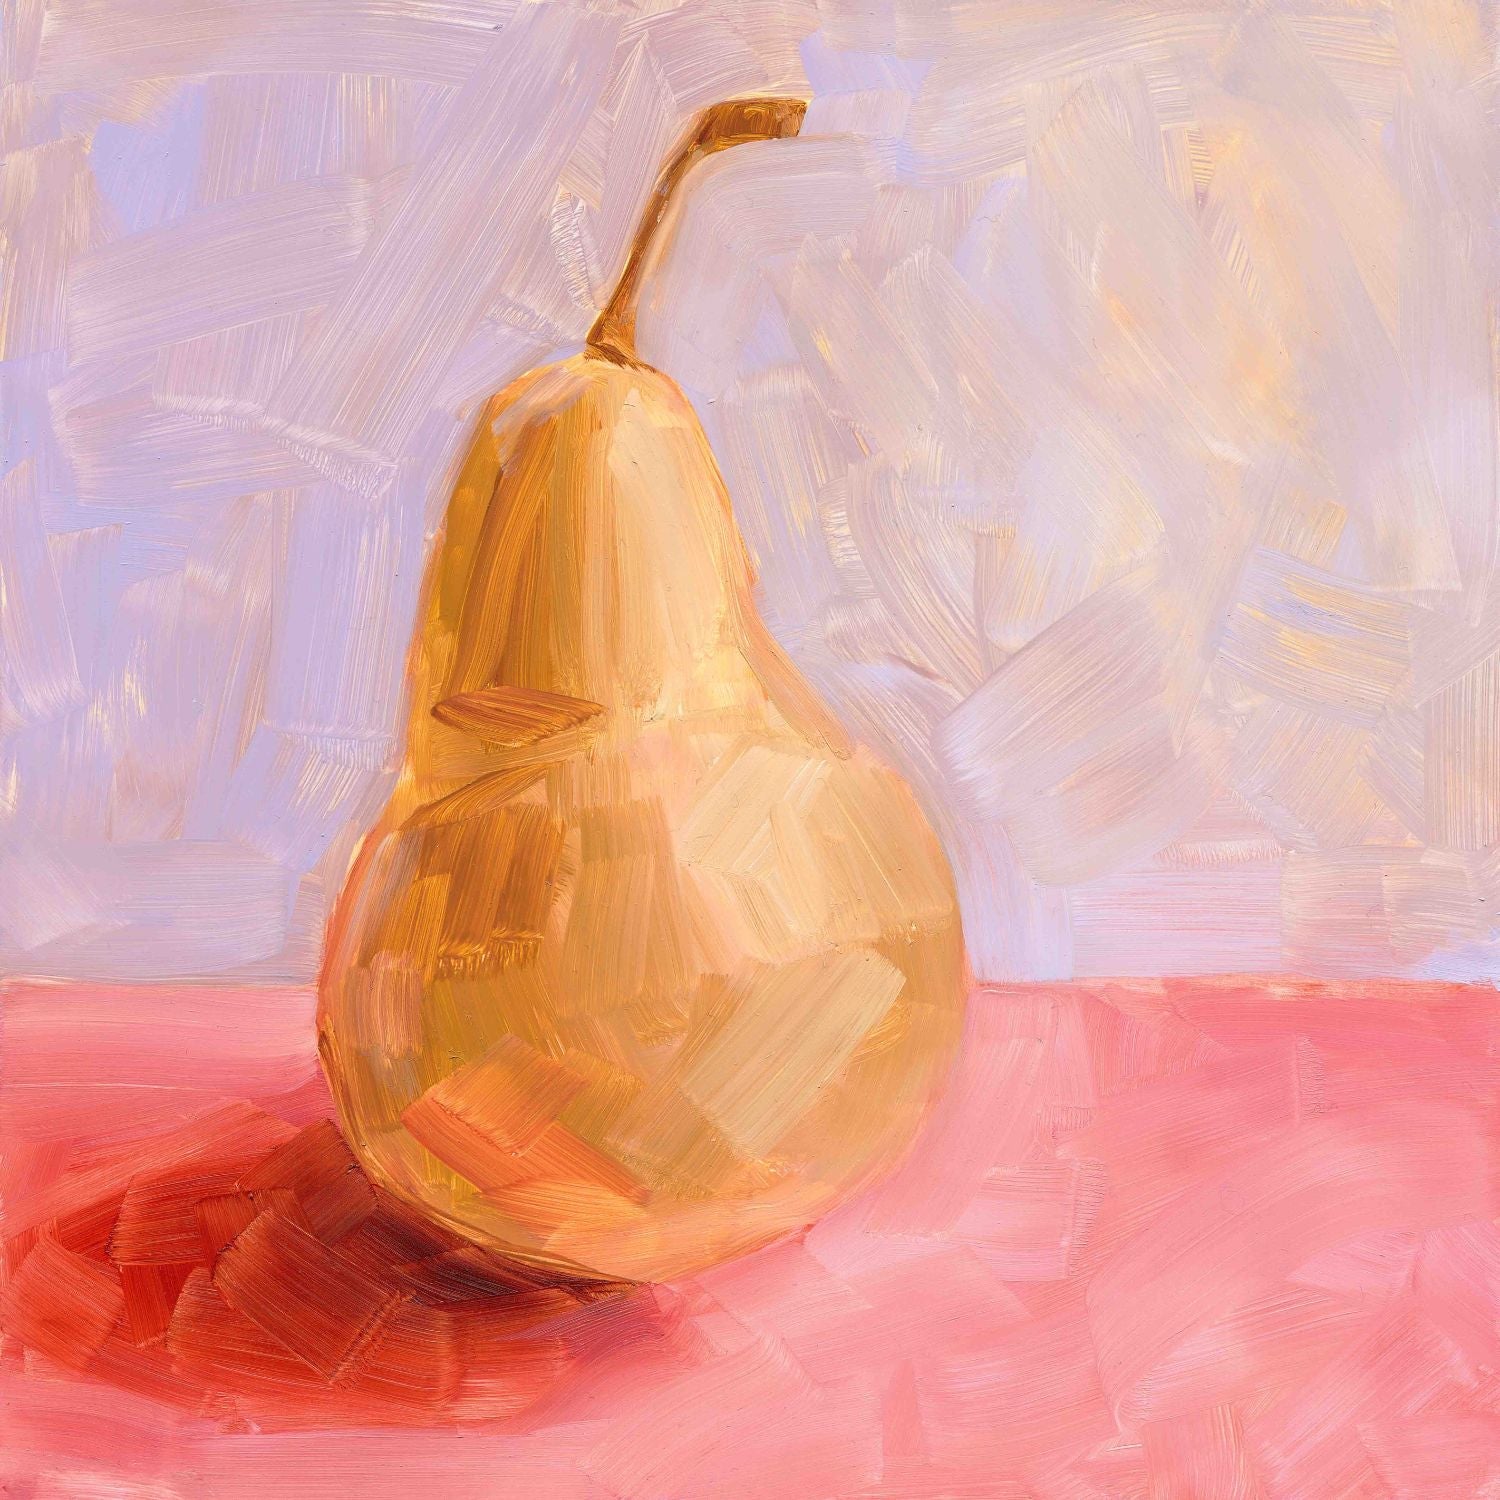 fine art paper print of a yellow pear with strong red-pink shadows on a textured pink surface and a textured lilac background